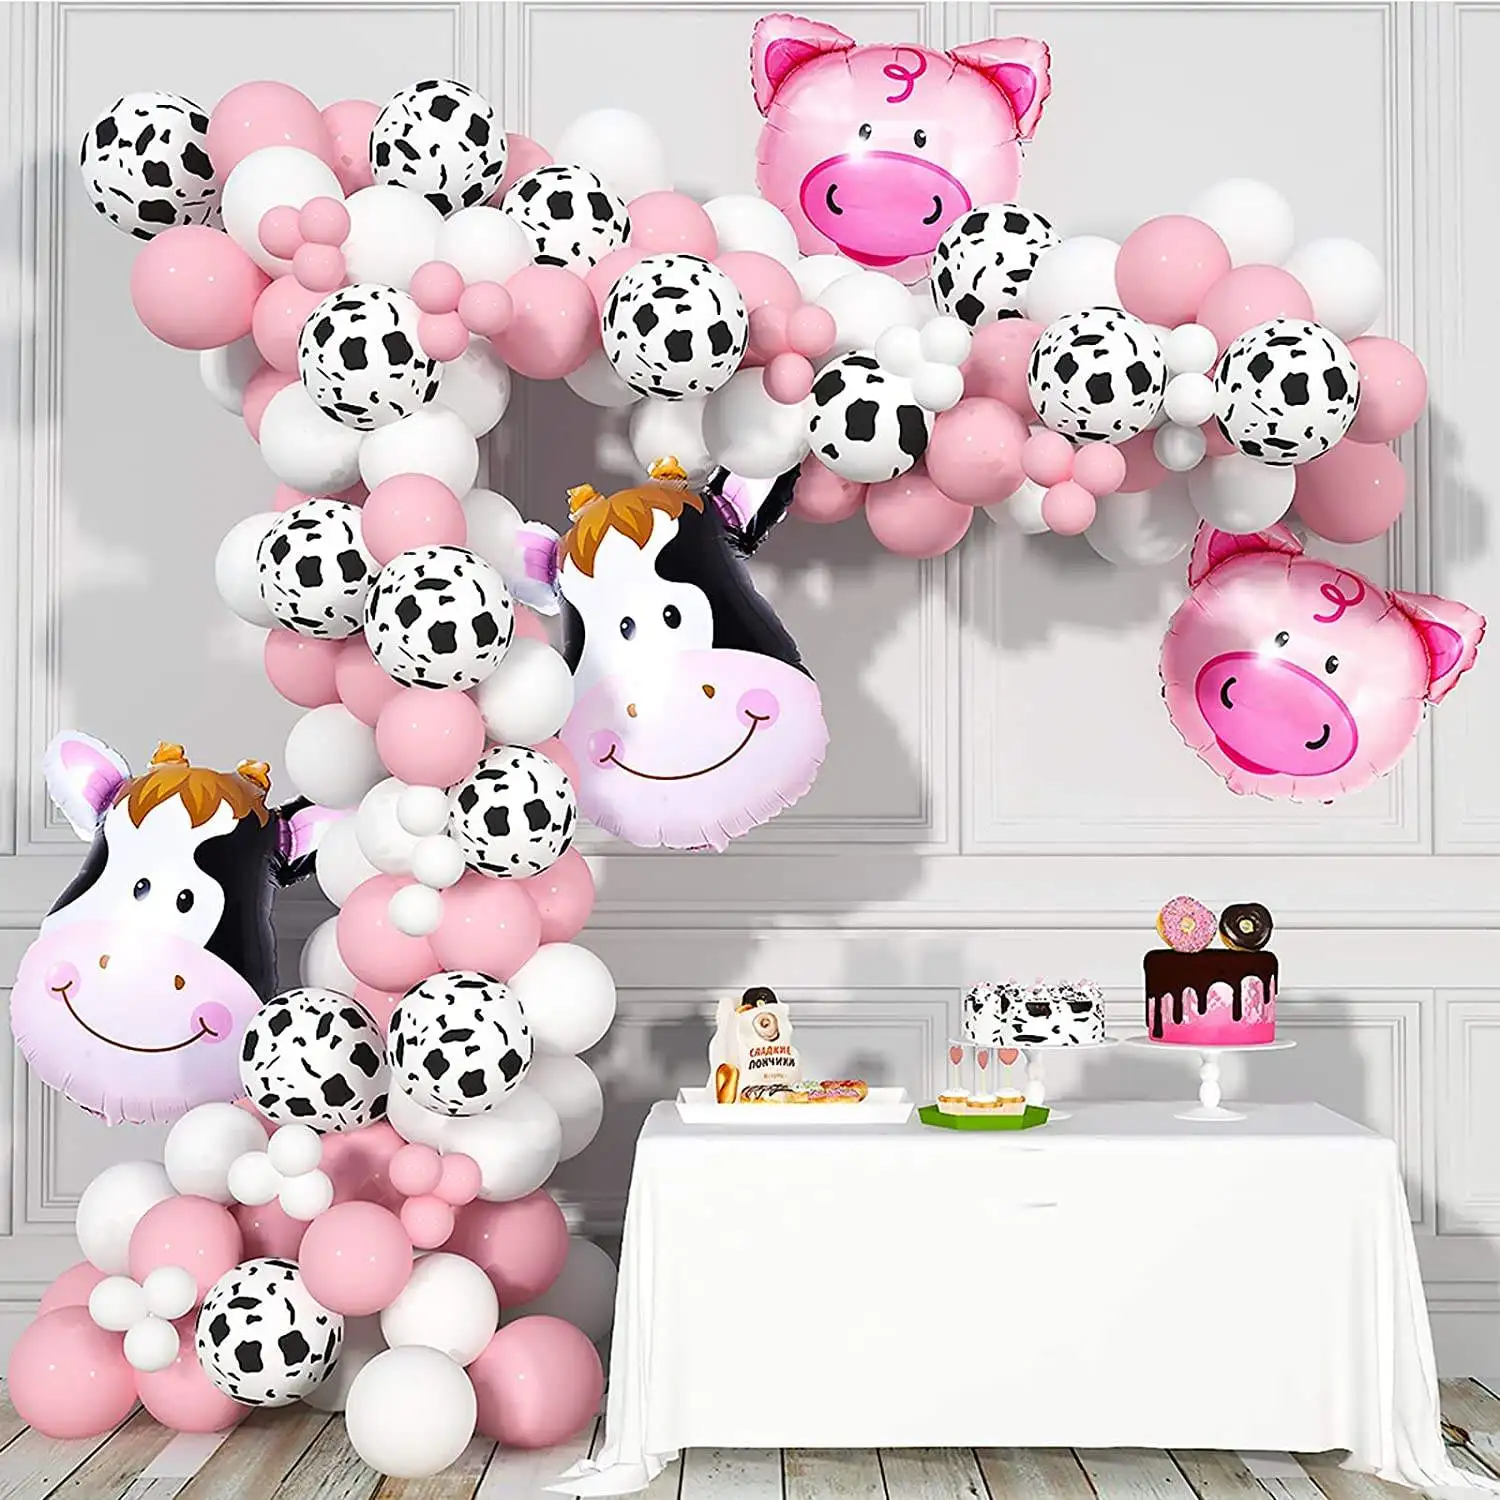 

Wholesale Cow Party Decorations Farm Animal Balloon Garland Kit with Cow Print Balloons for Girls Birthday Party Supplies